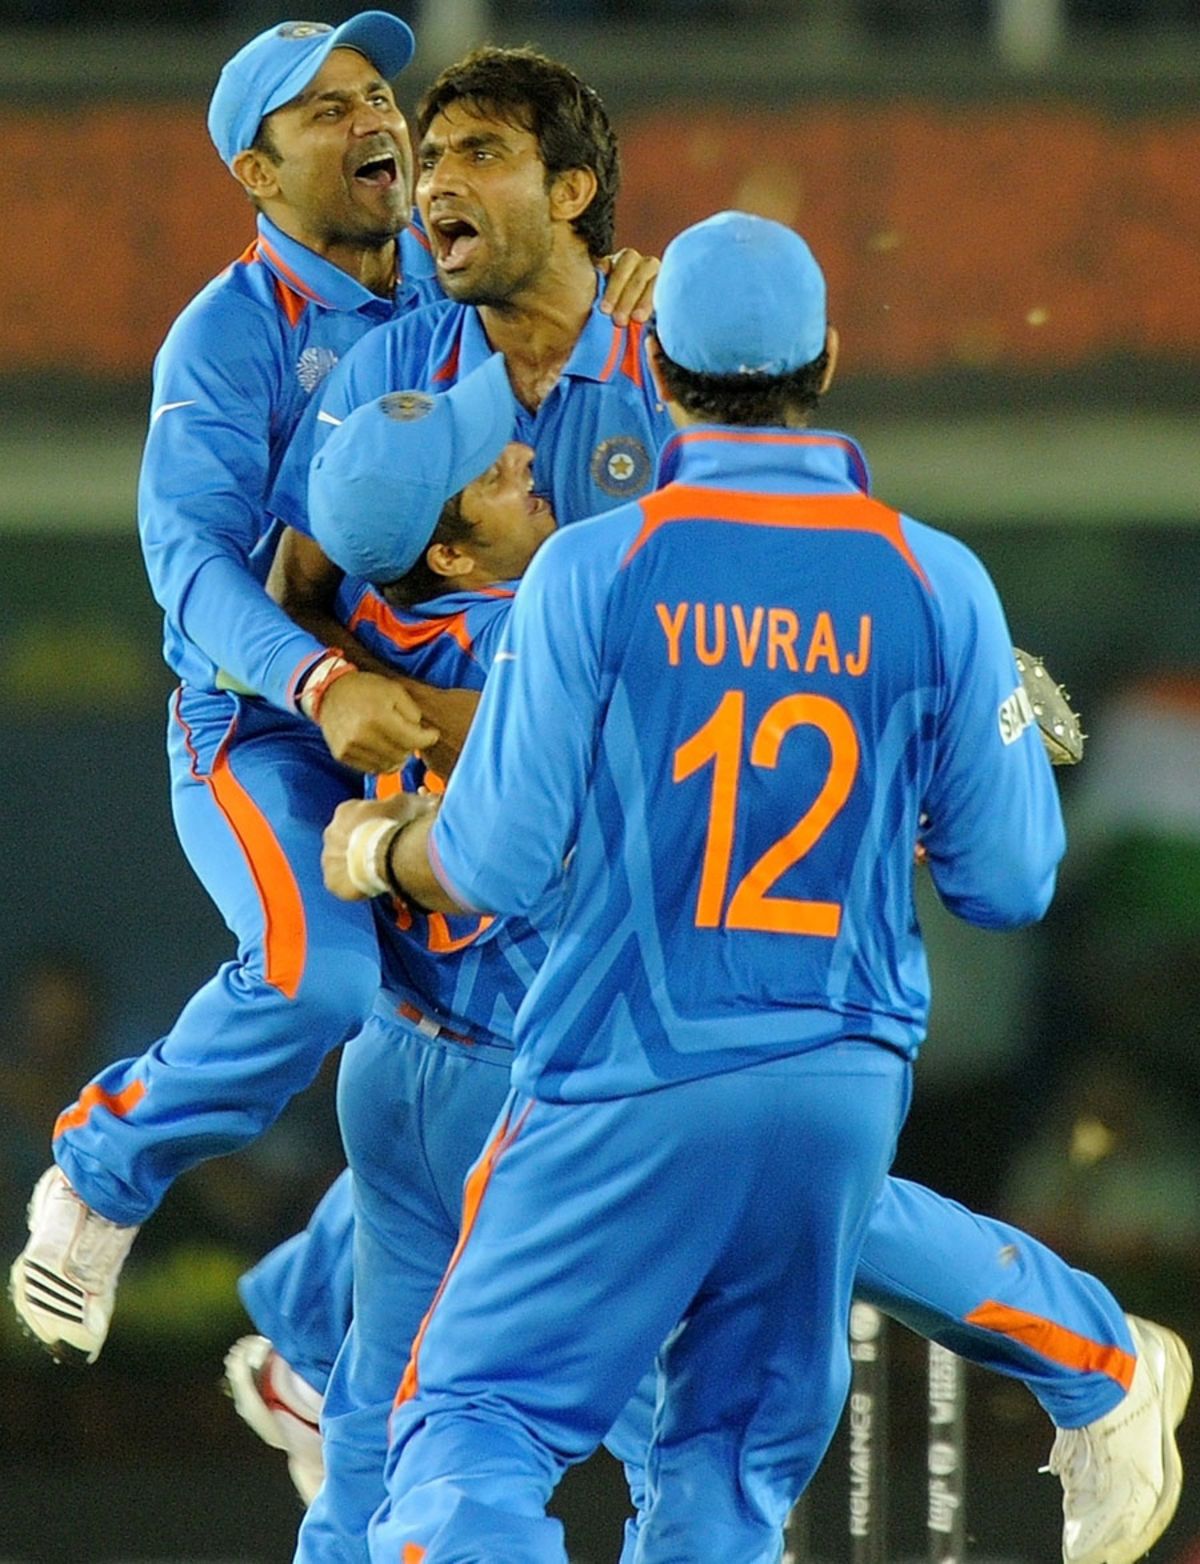 Munaf Patel after taking a wicket in a match between India and Pakistan in the 2011 World Cup Semi-finals at Mohali (Punjab)